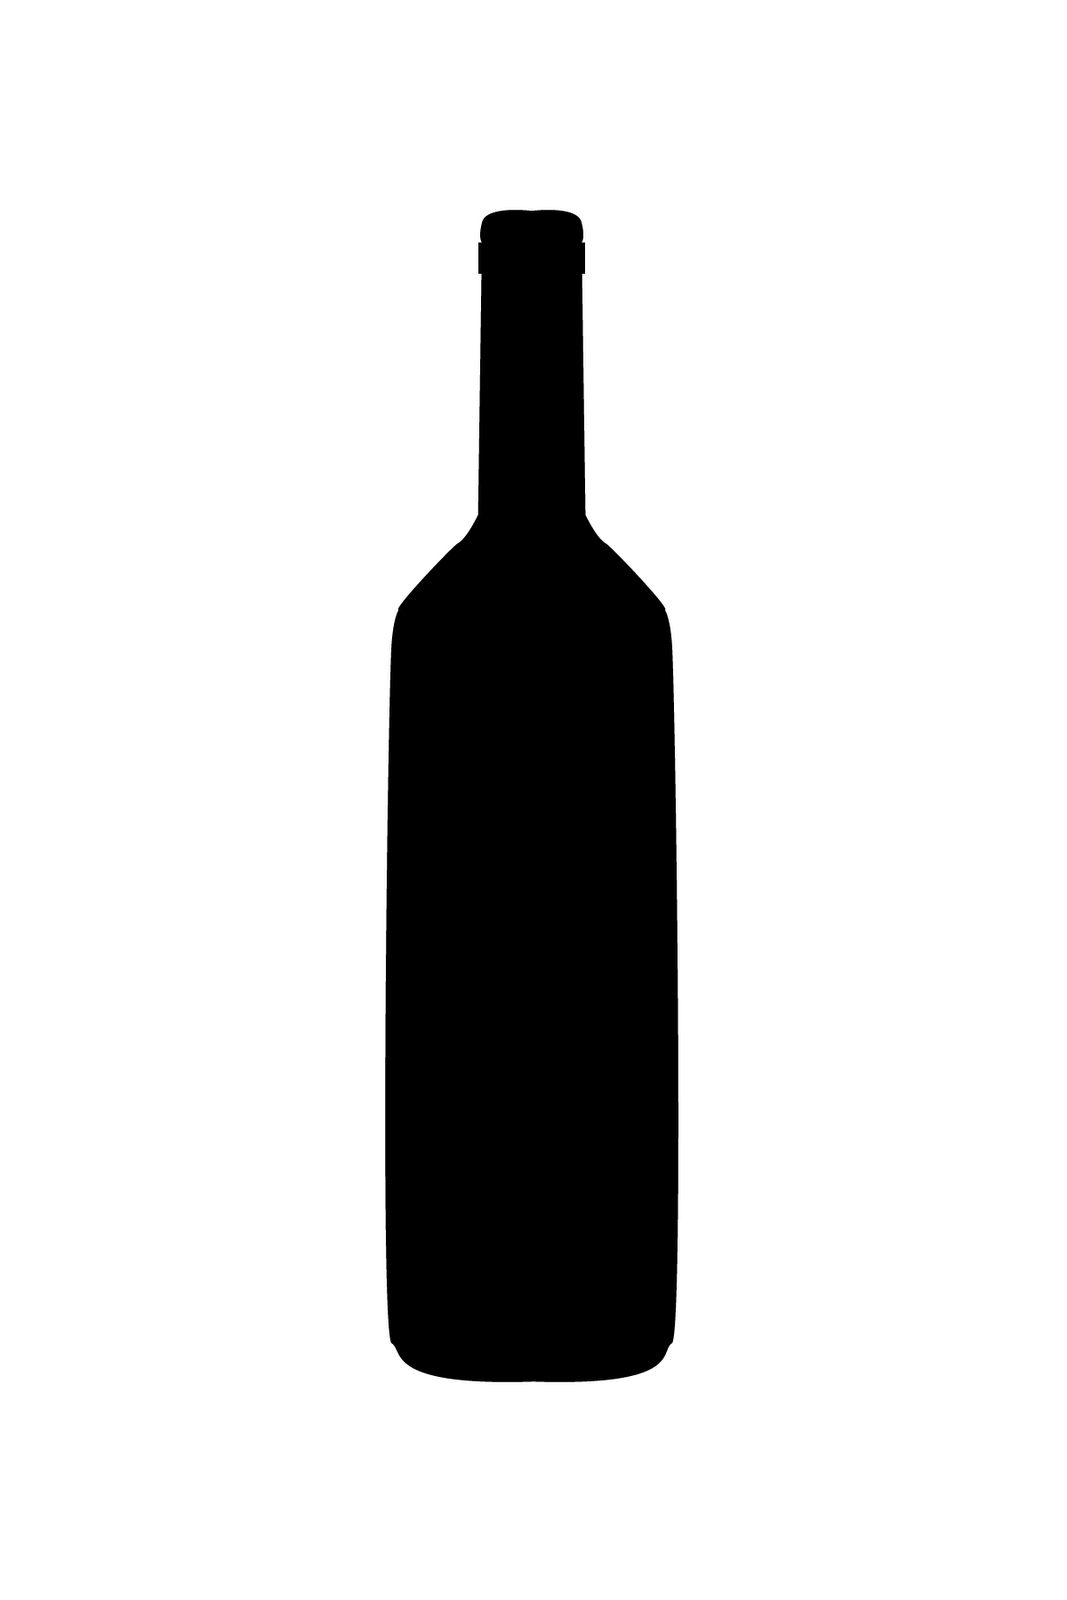 Download Principles of Graphic Art: Bottle Silhouettes